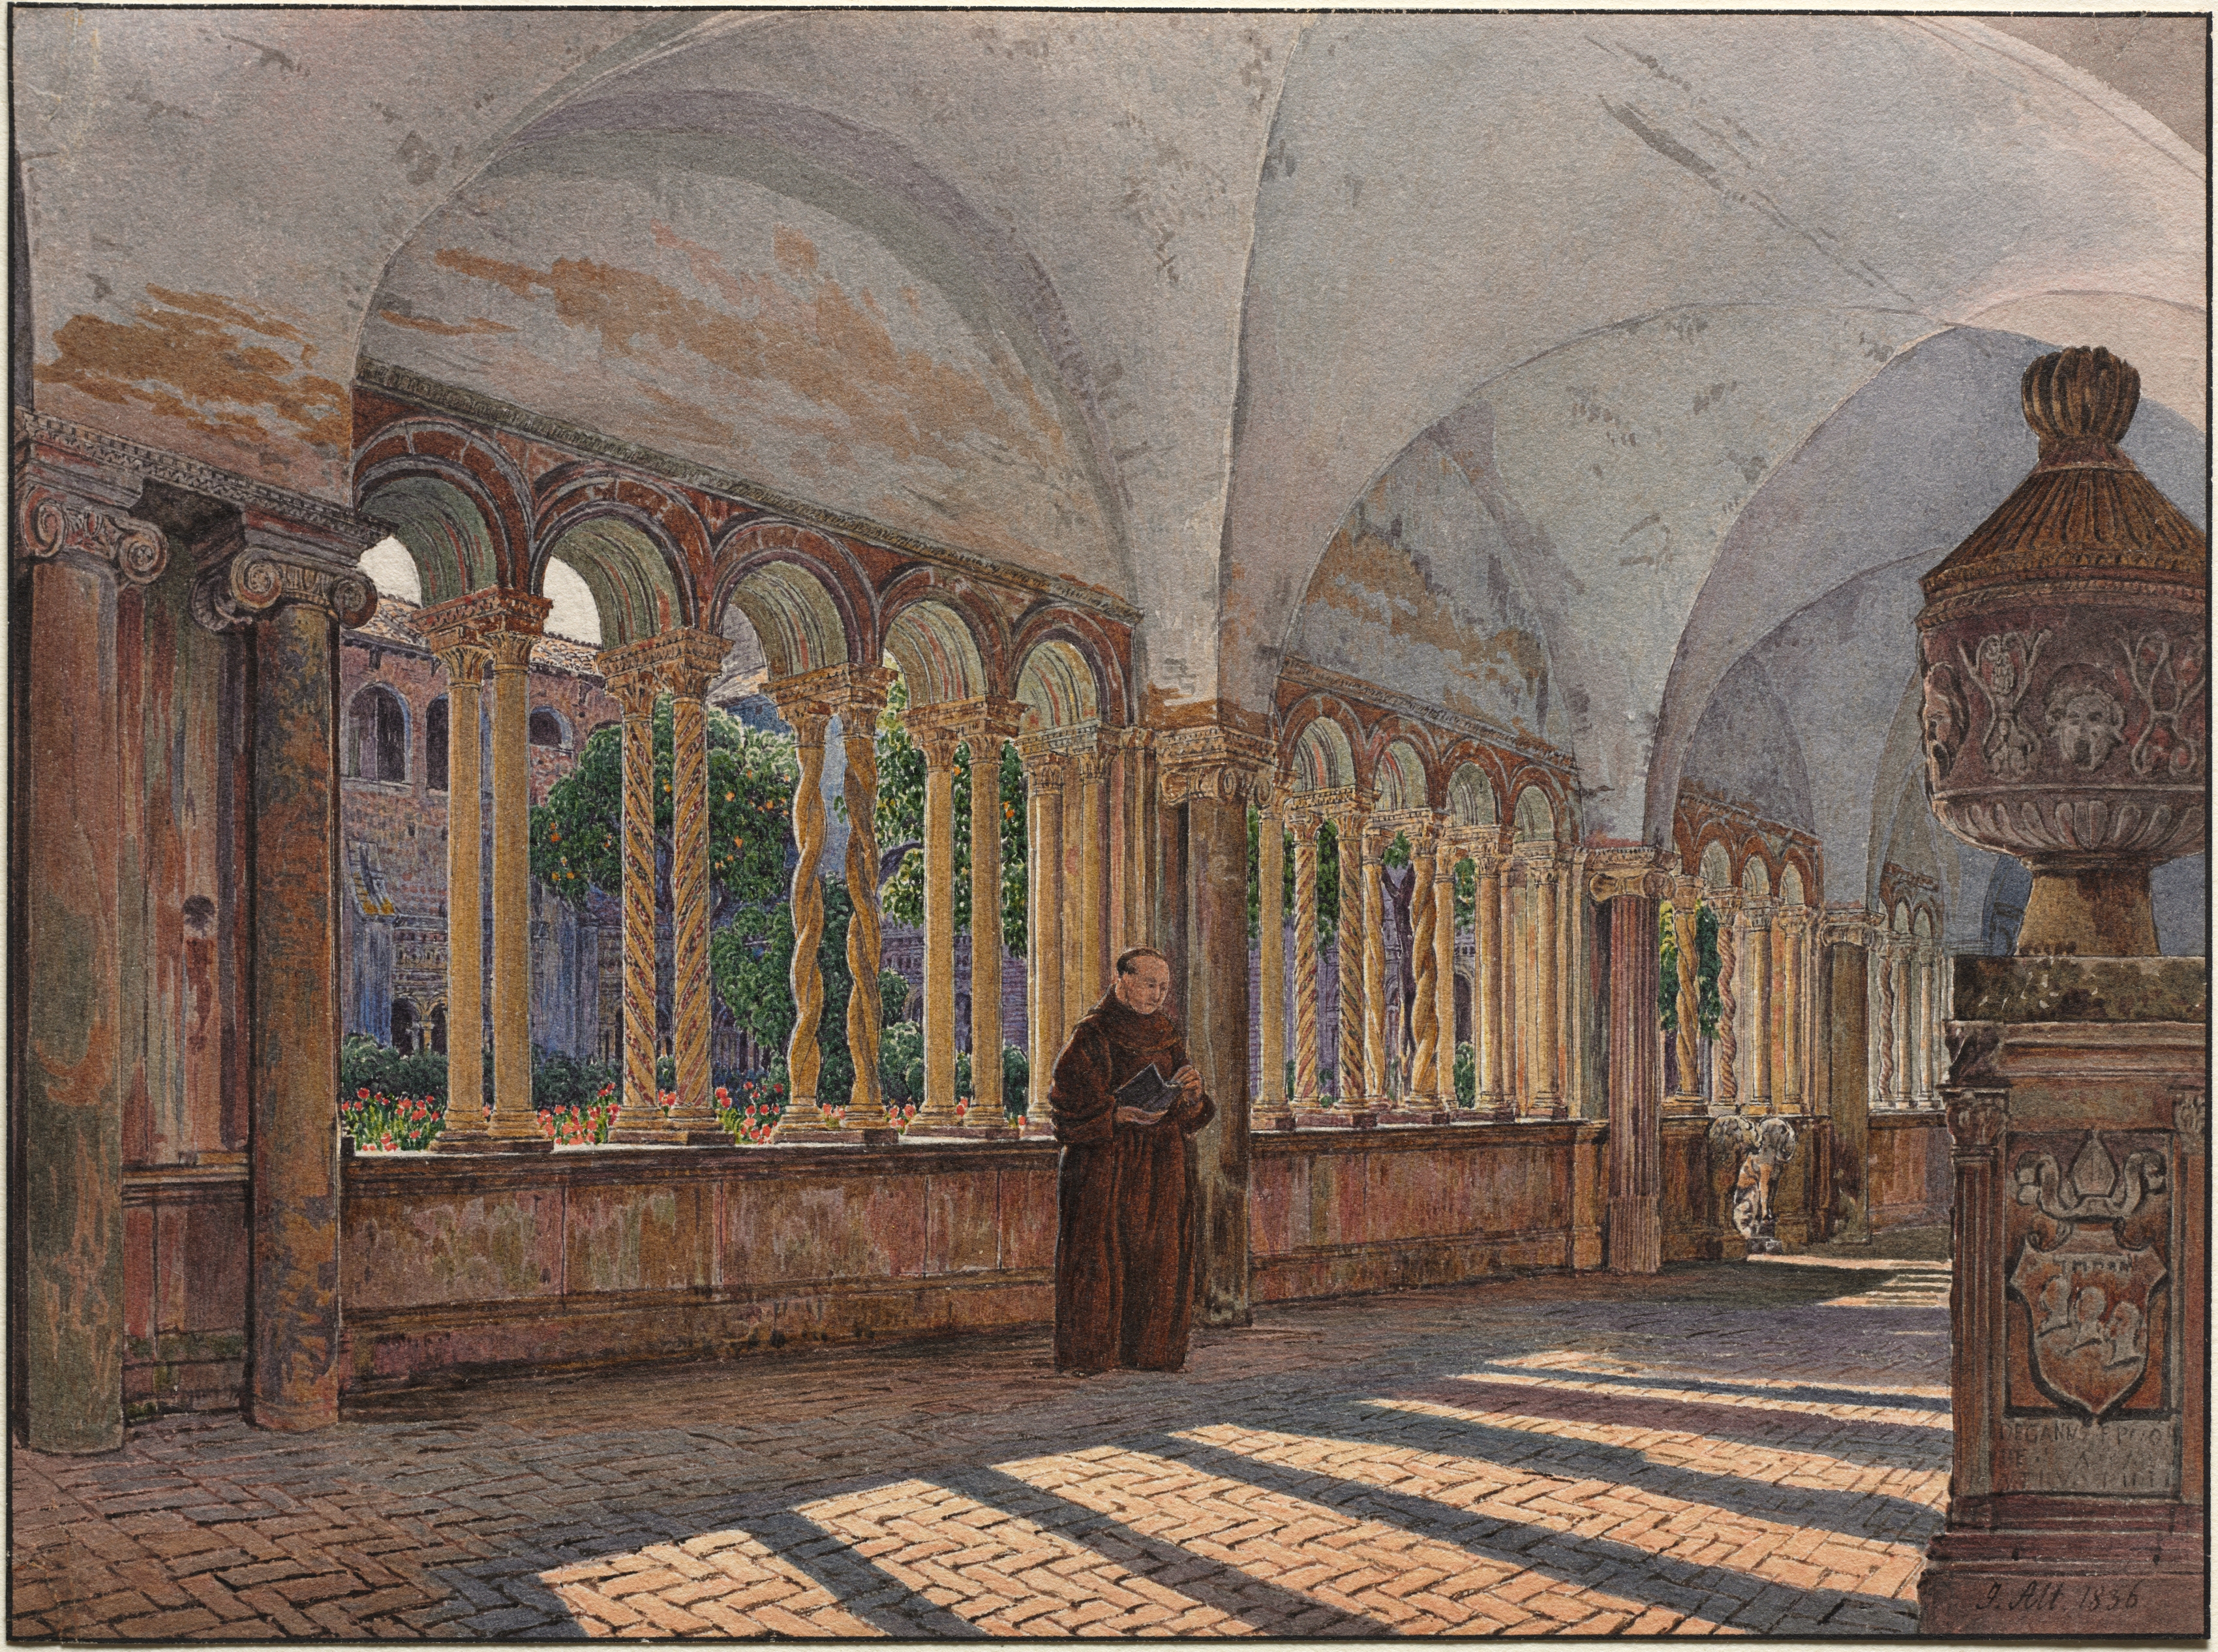 View of the Cloister of San Giovanni in Laterano, Rome